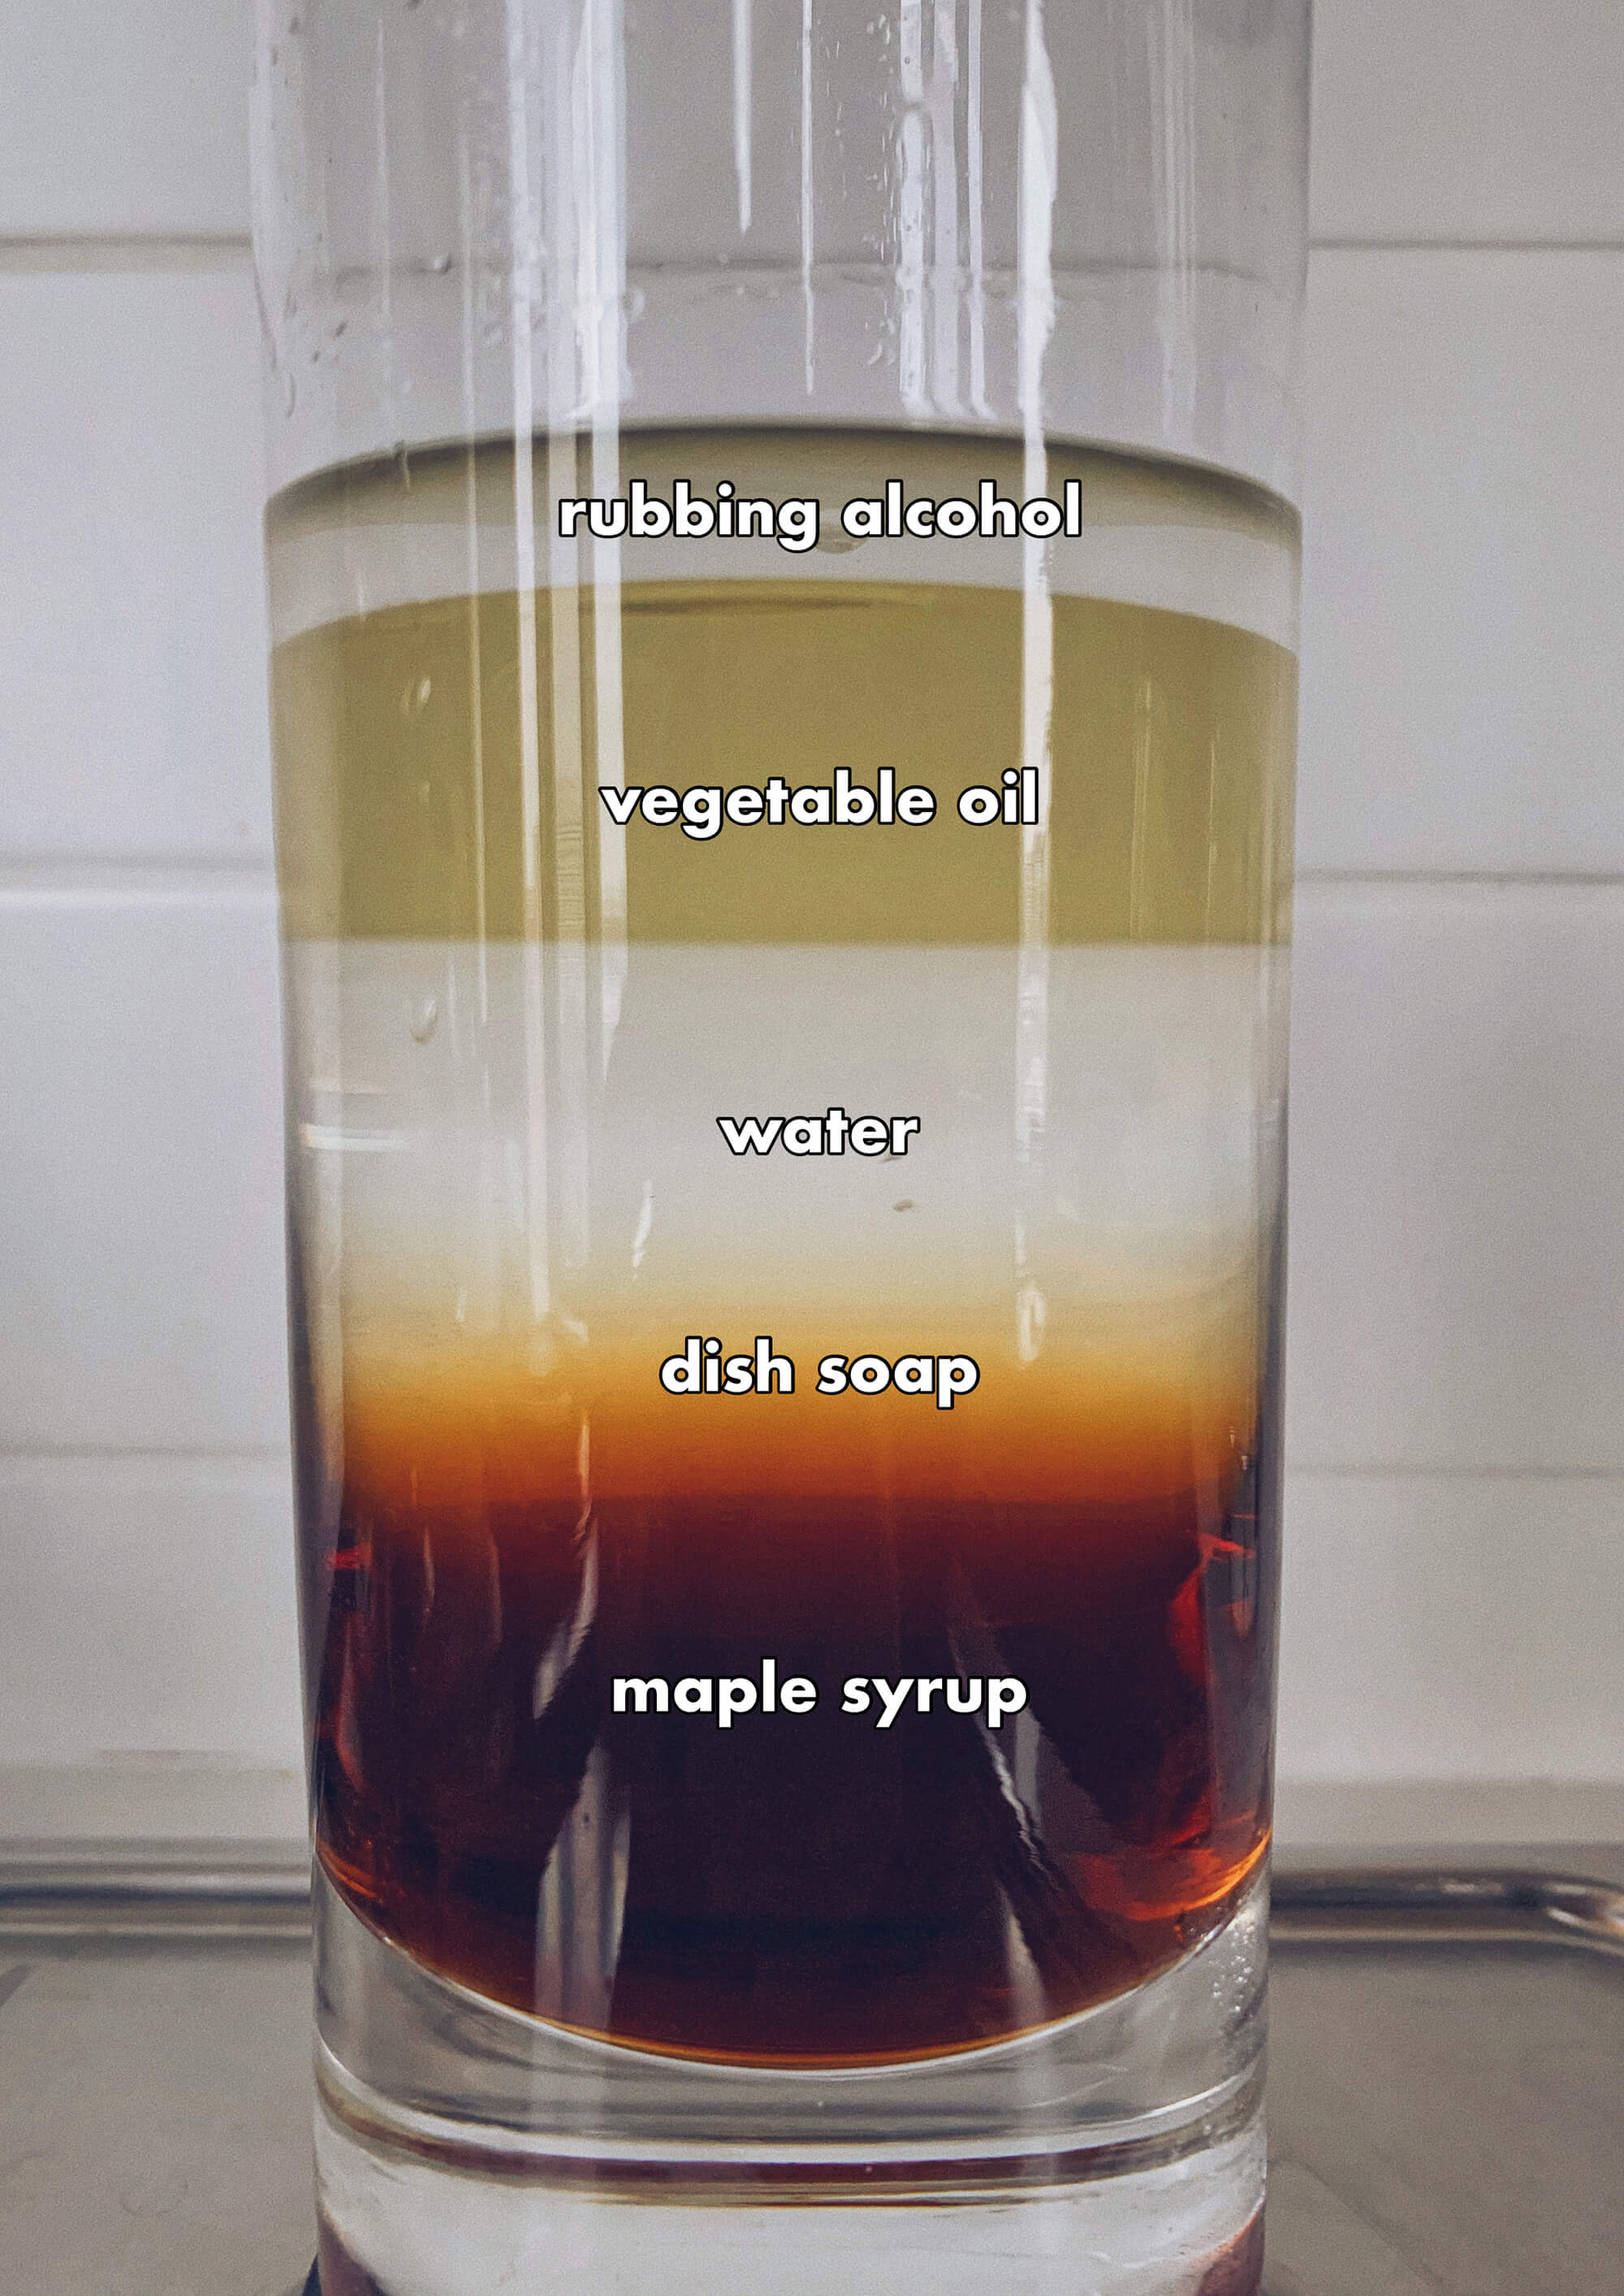 Rubbing alcohol, vegetable oil, water, dish soap, and maple syrup layered in a glass.